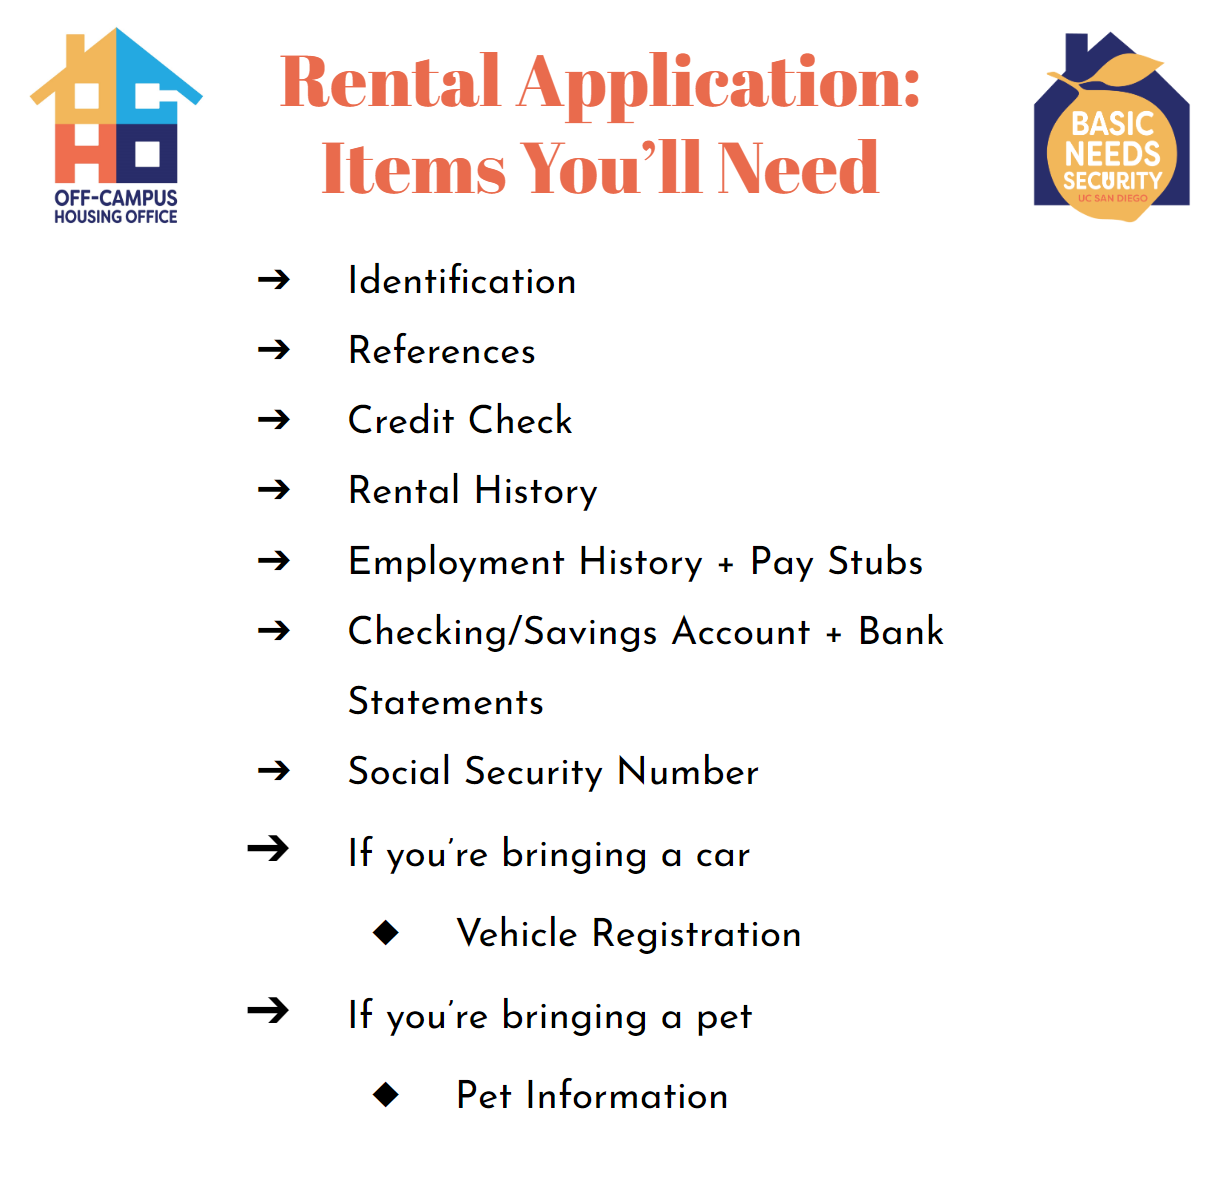 Rental-App-Items-You-Need.png